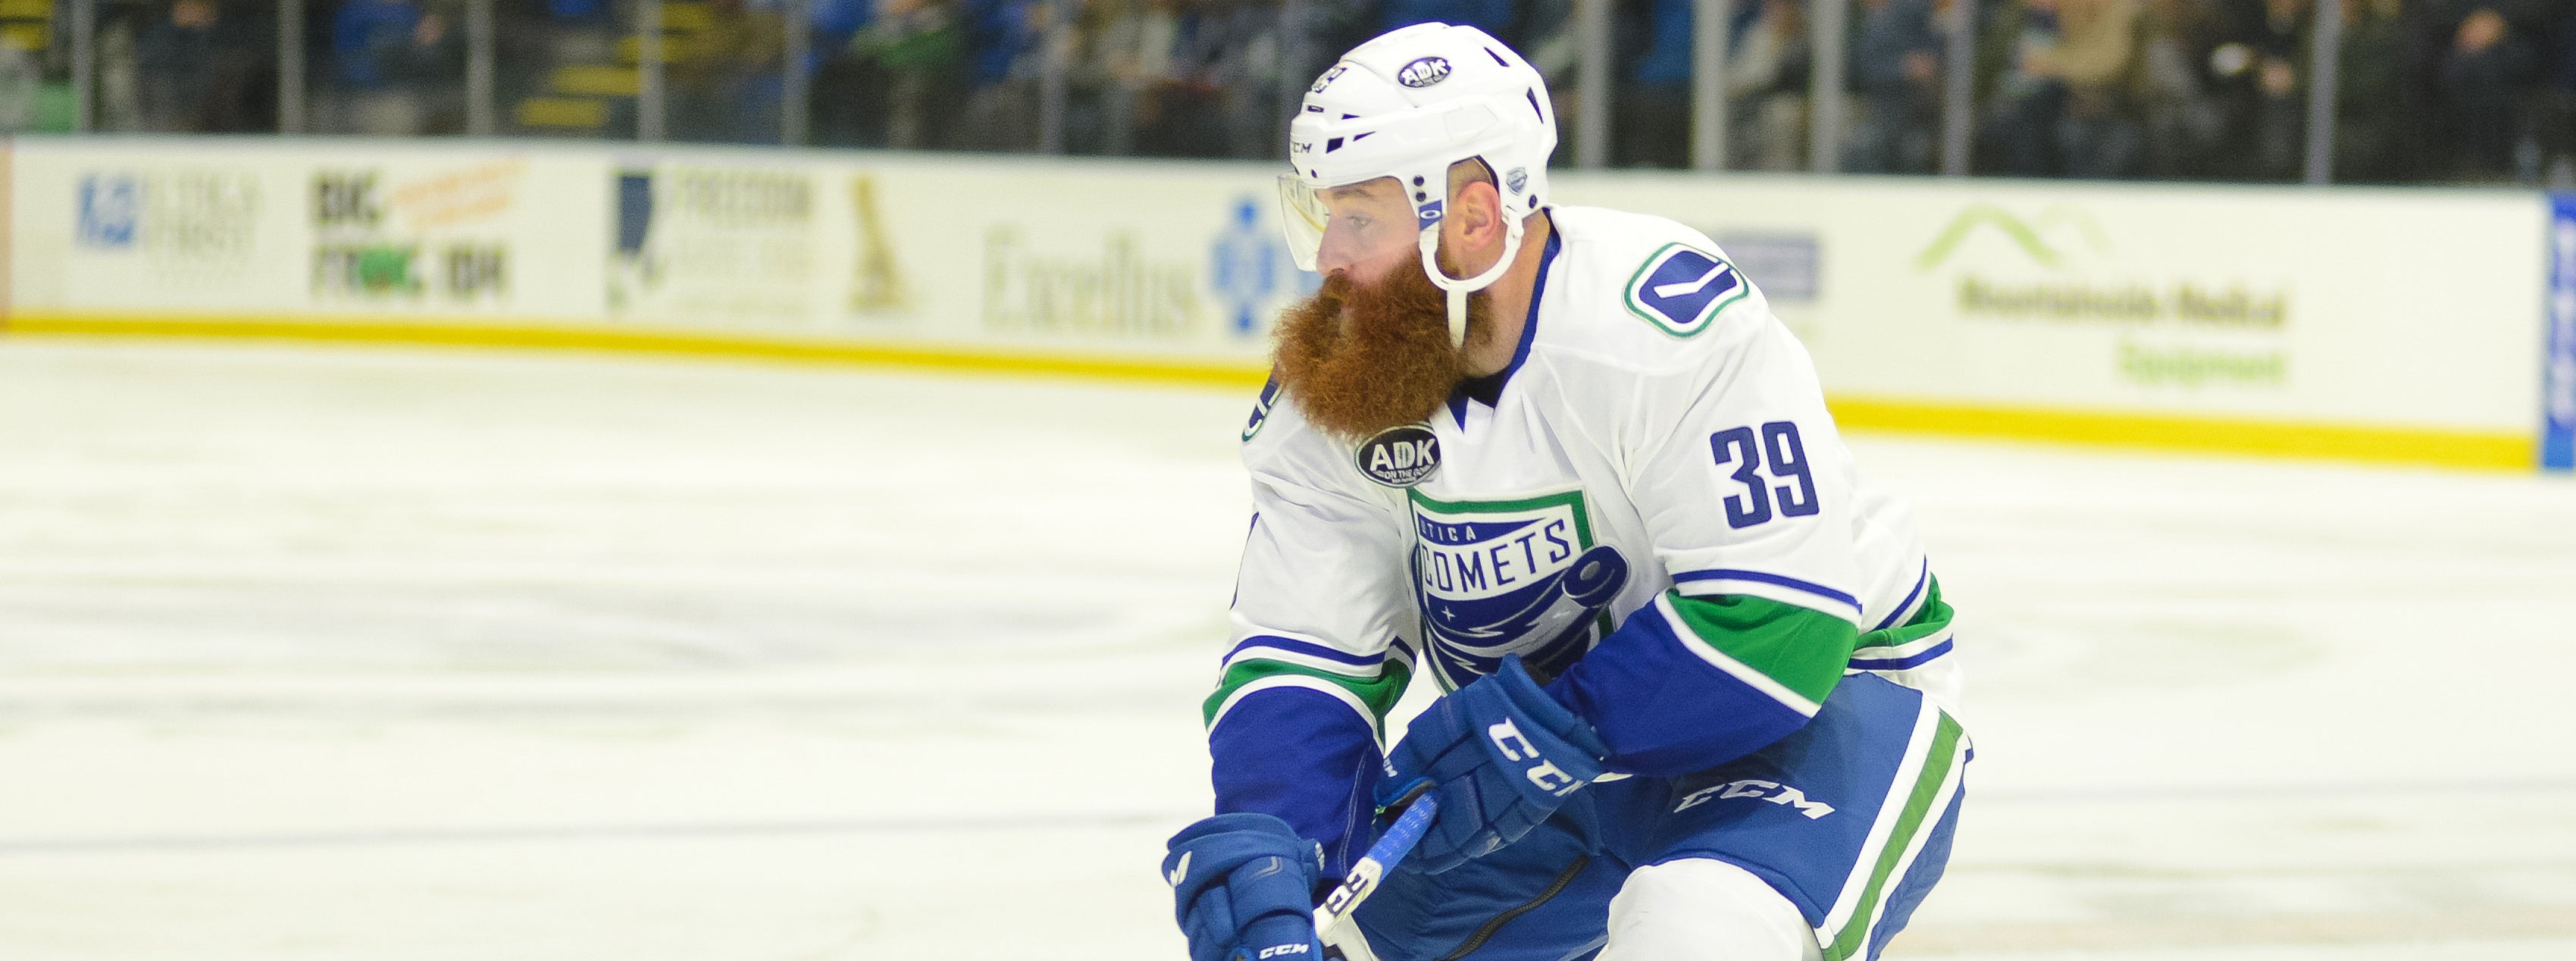 COMETS CONTINUE ROAD TRIP IN PROVIDENCE